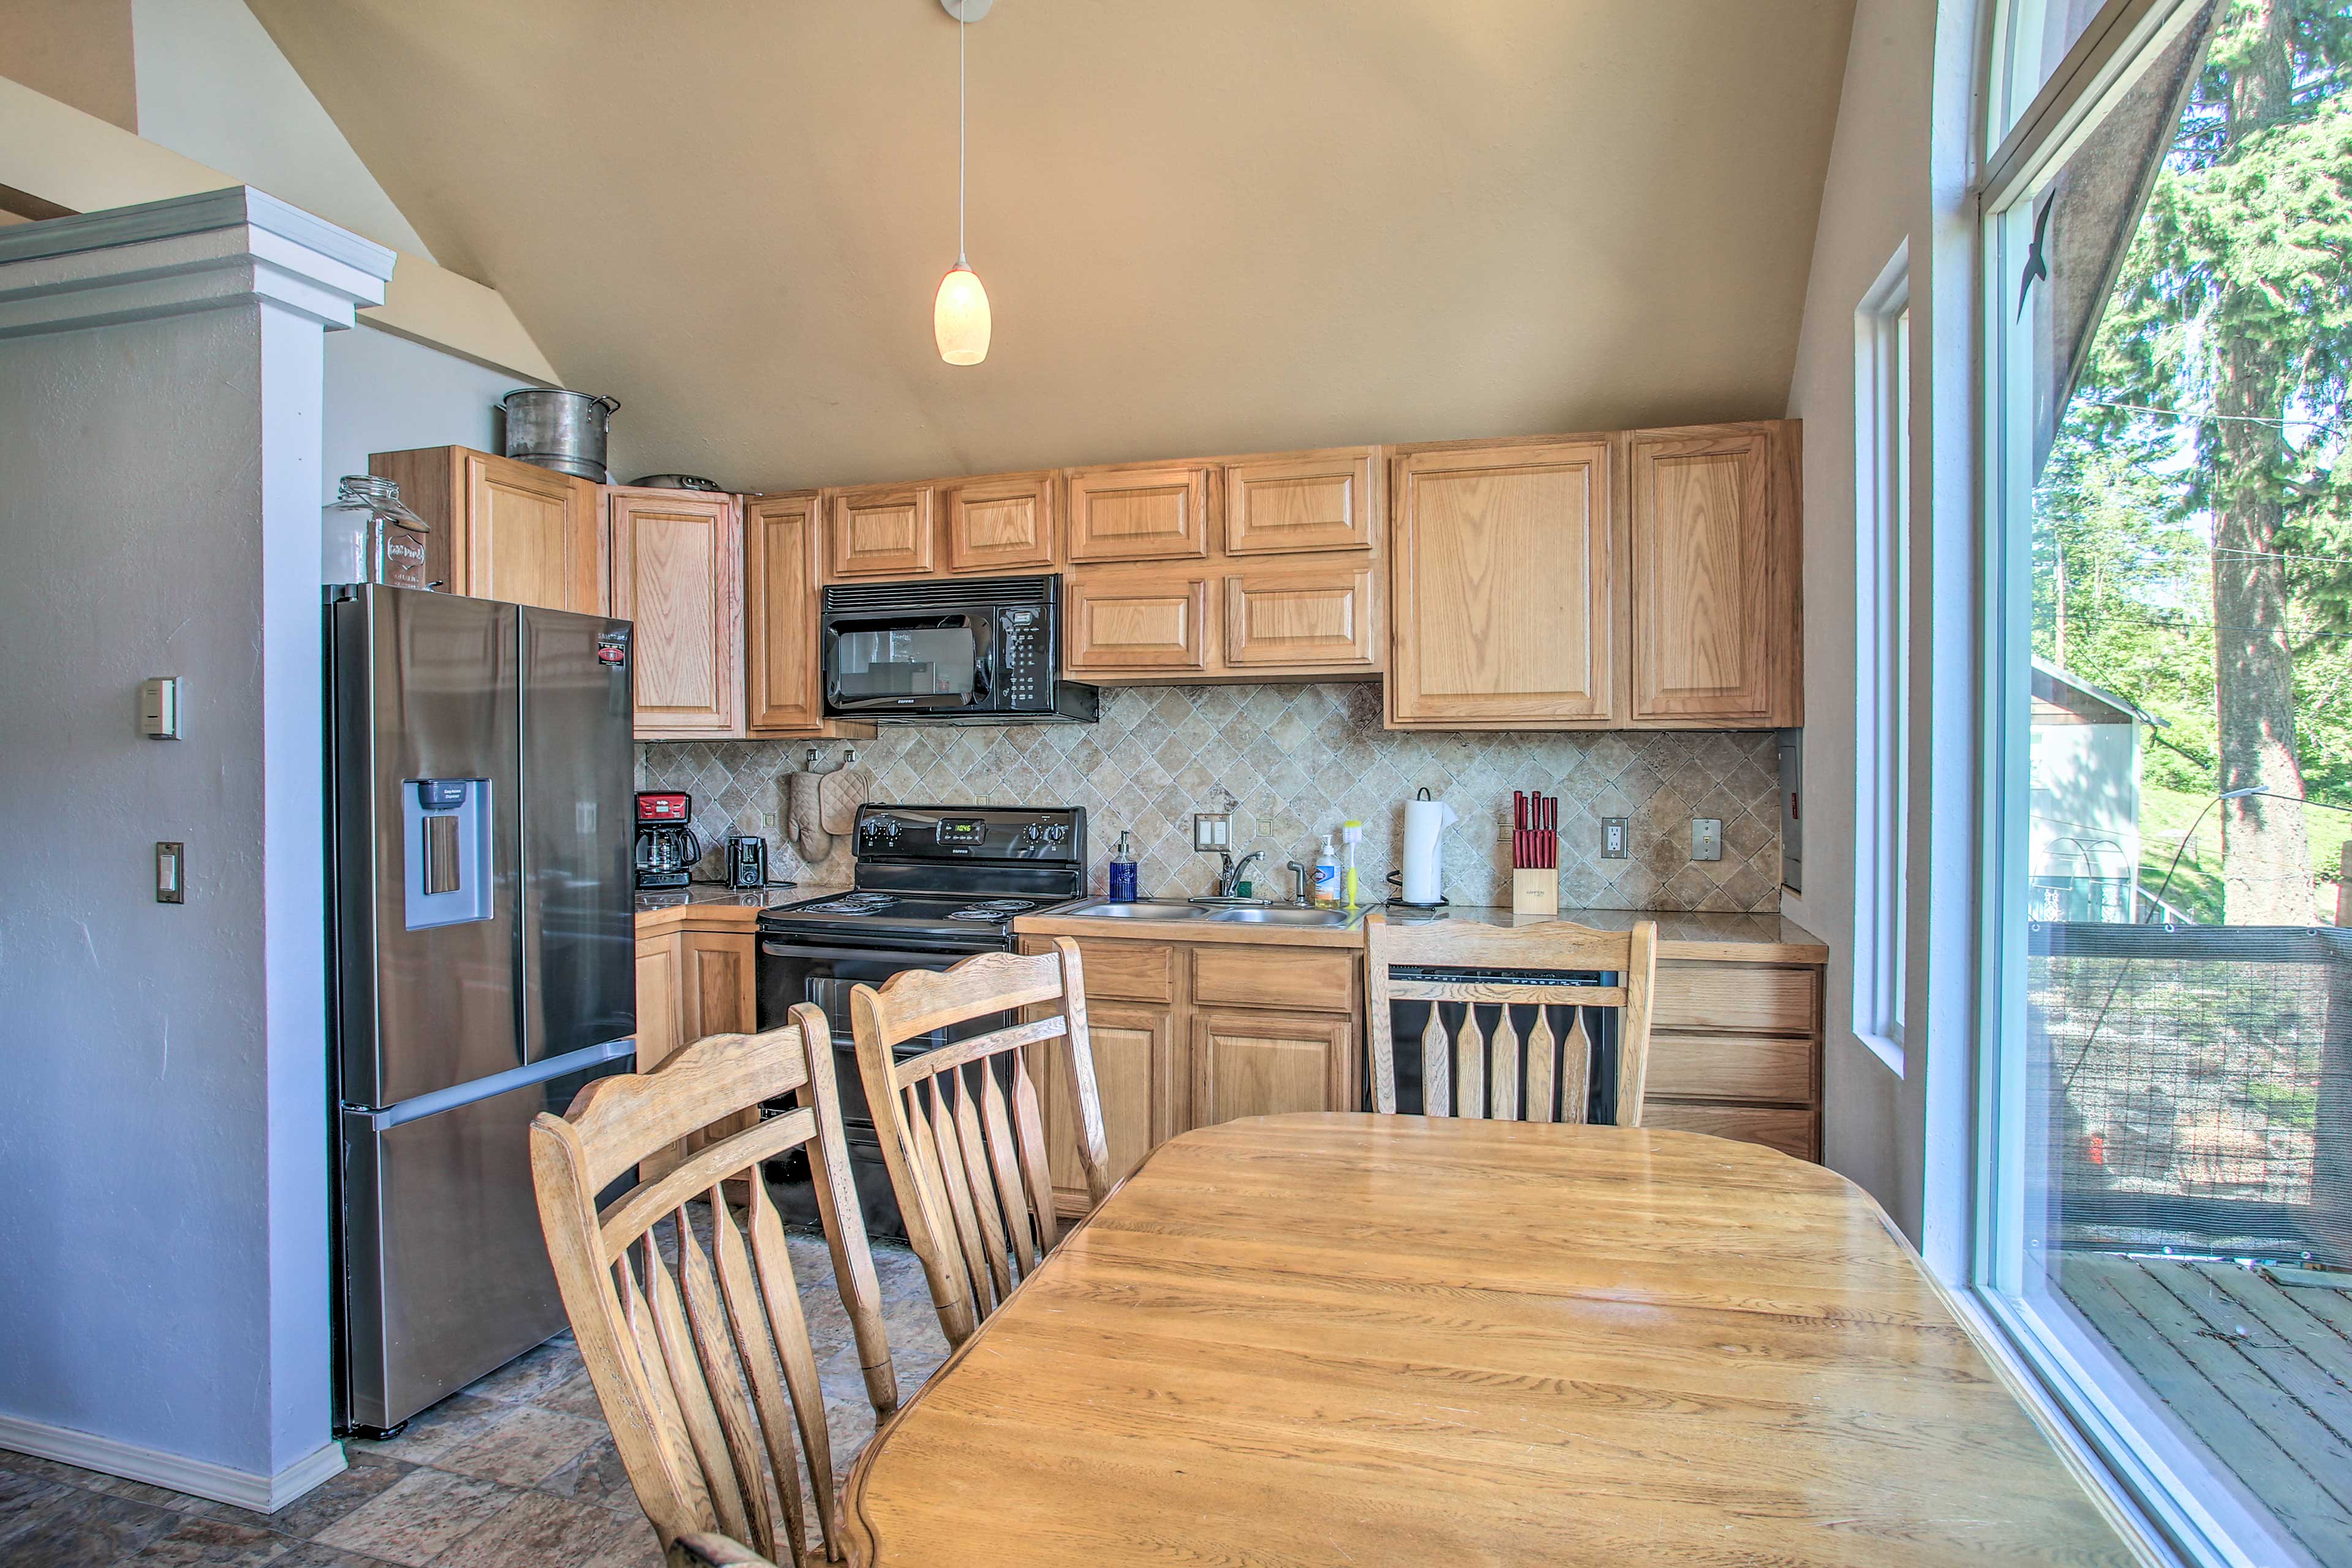 Kitchen | Main Level | Fully Equipped | Coffee Maker | Cooking Basics | Toaster